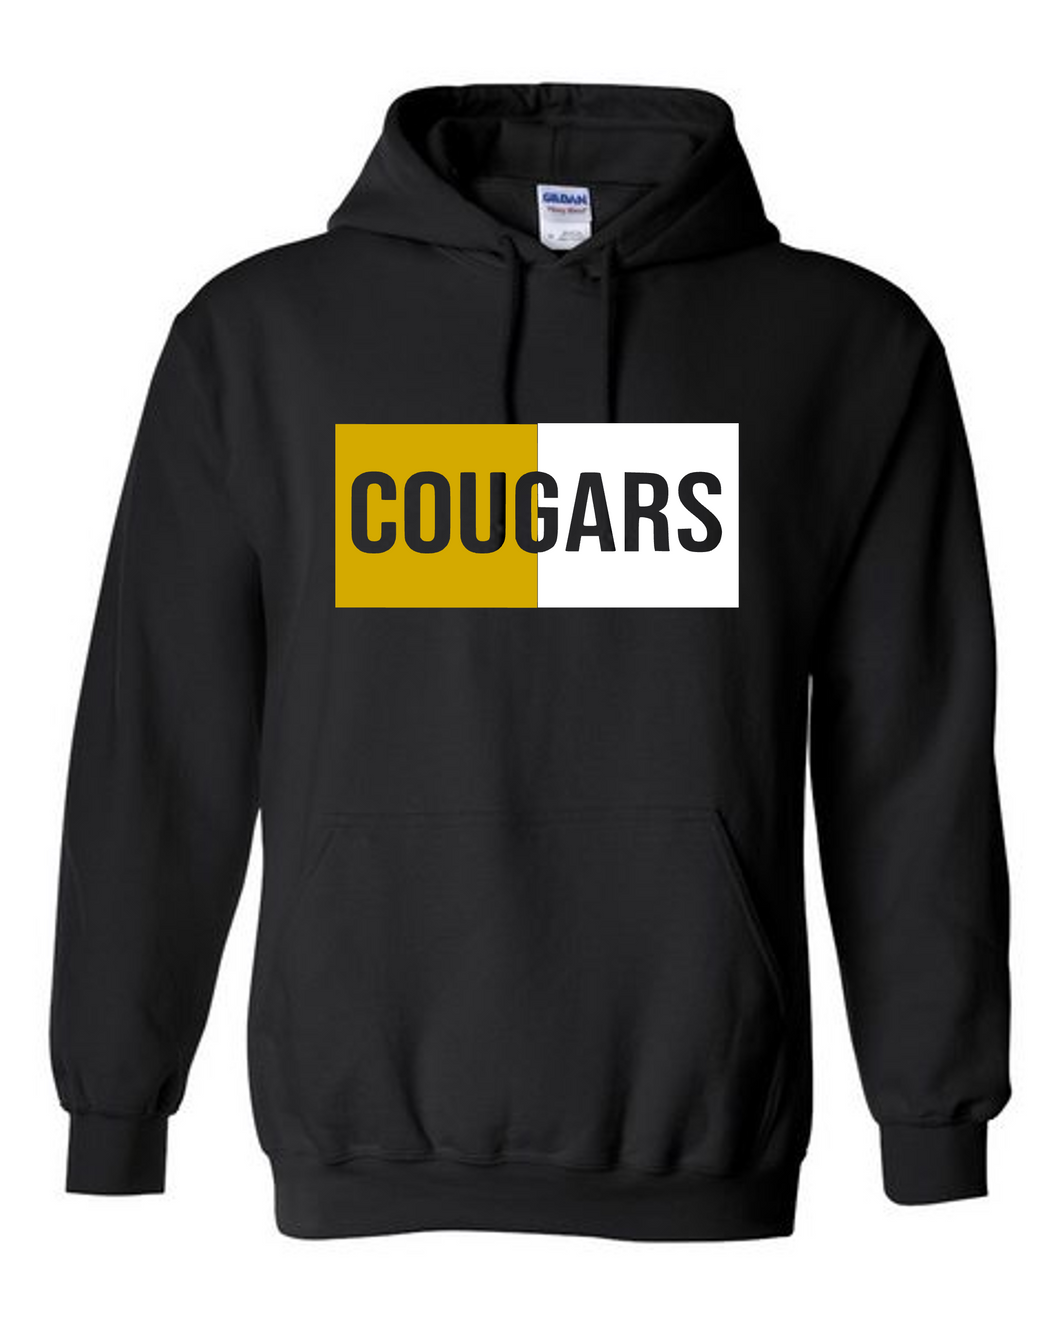 COUGARS YOUTH two toned hoodie